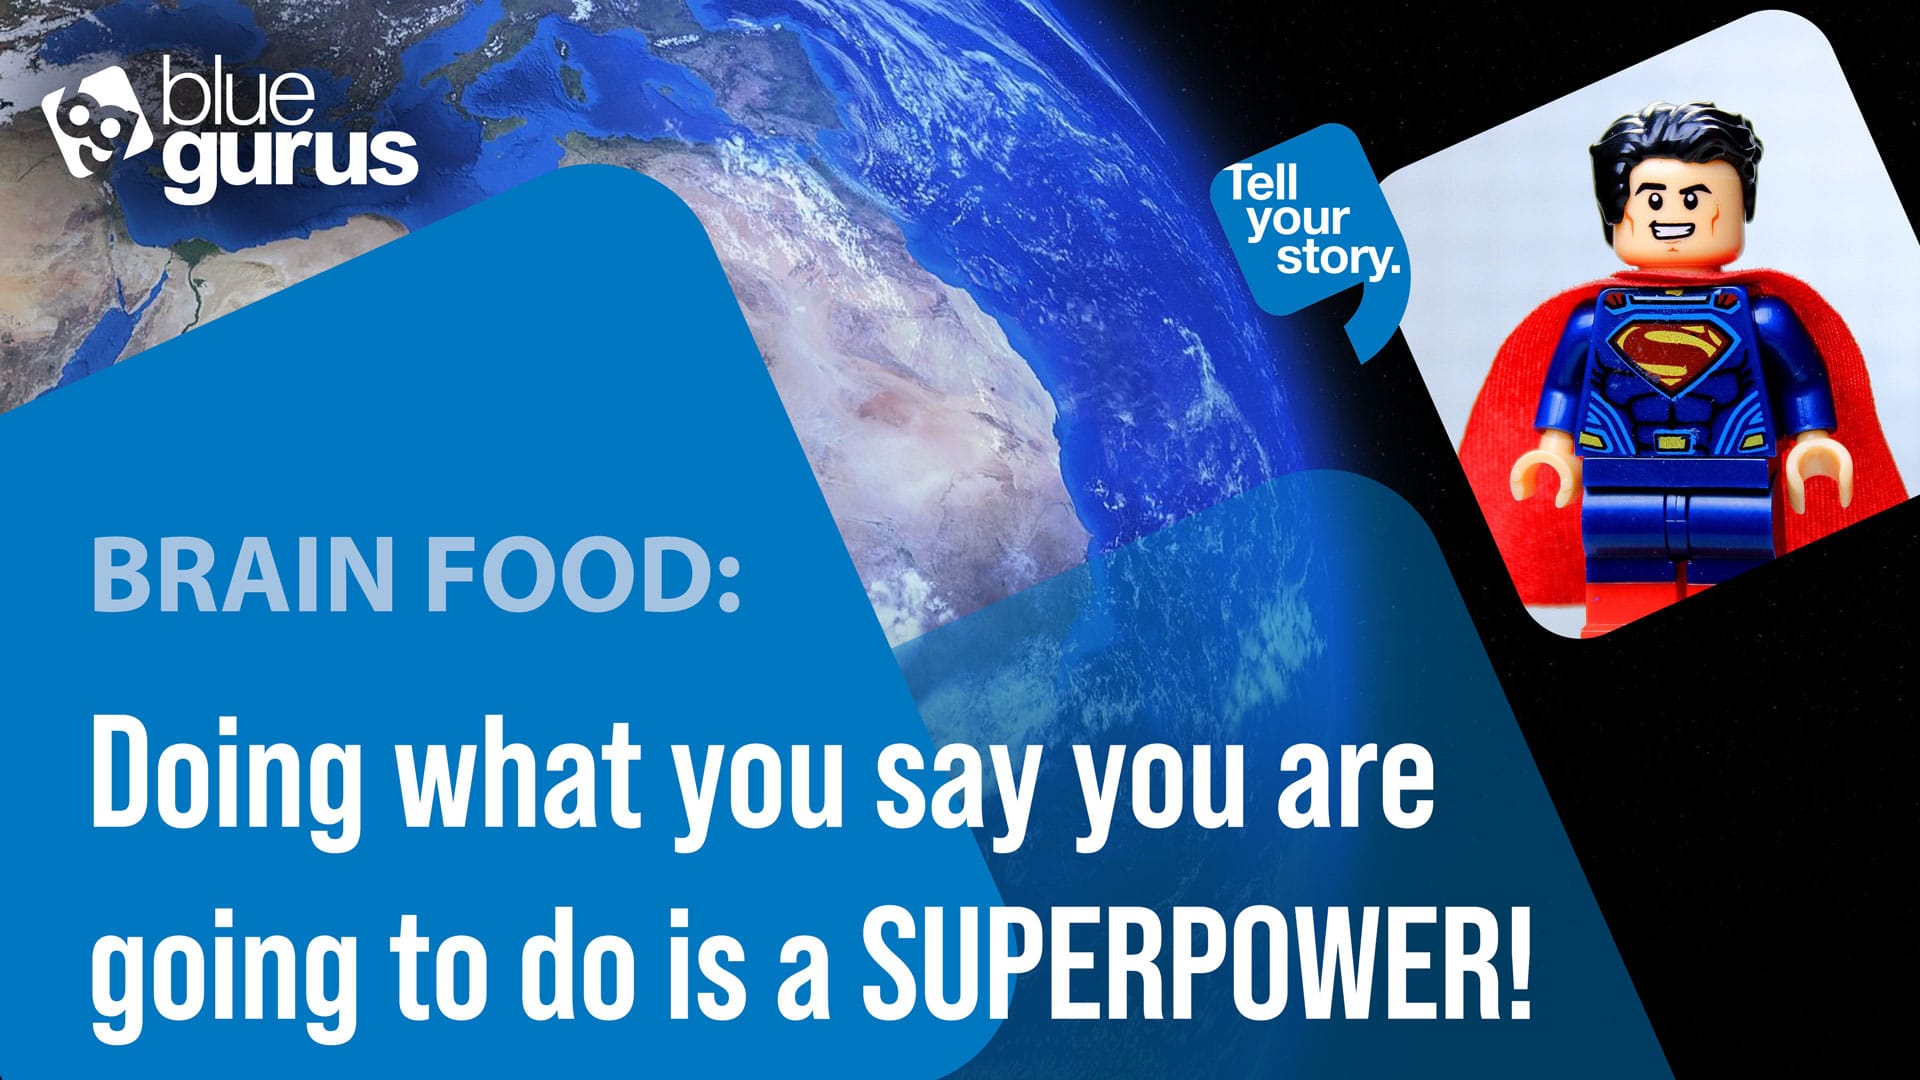 Doing what you say you are going to do is a superpower!